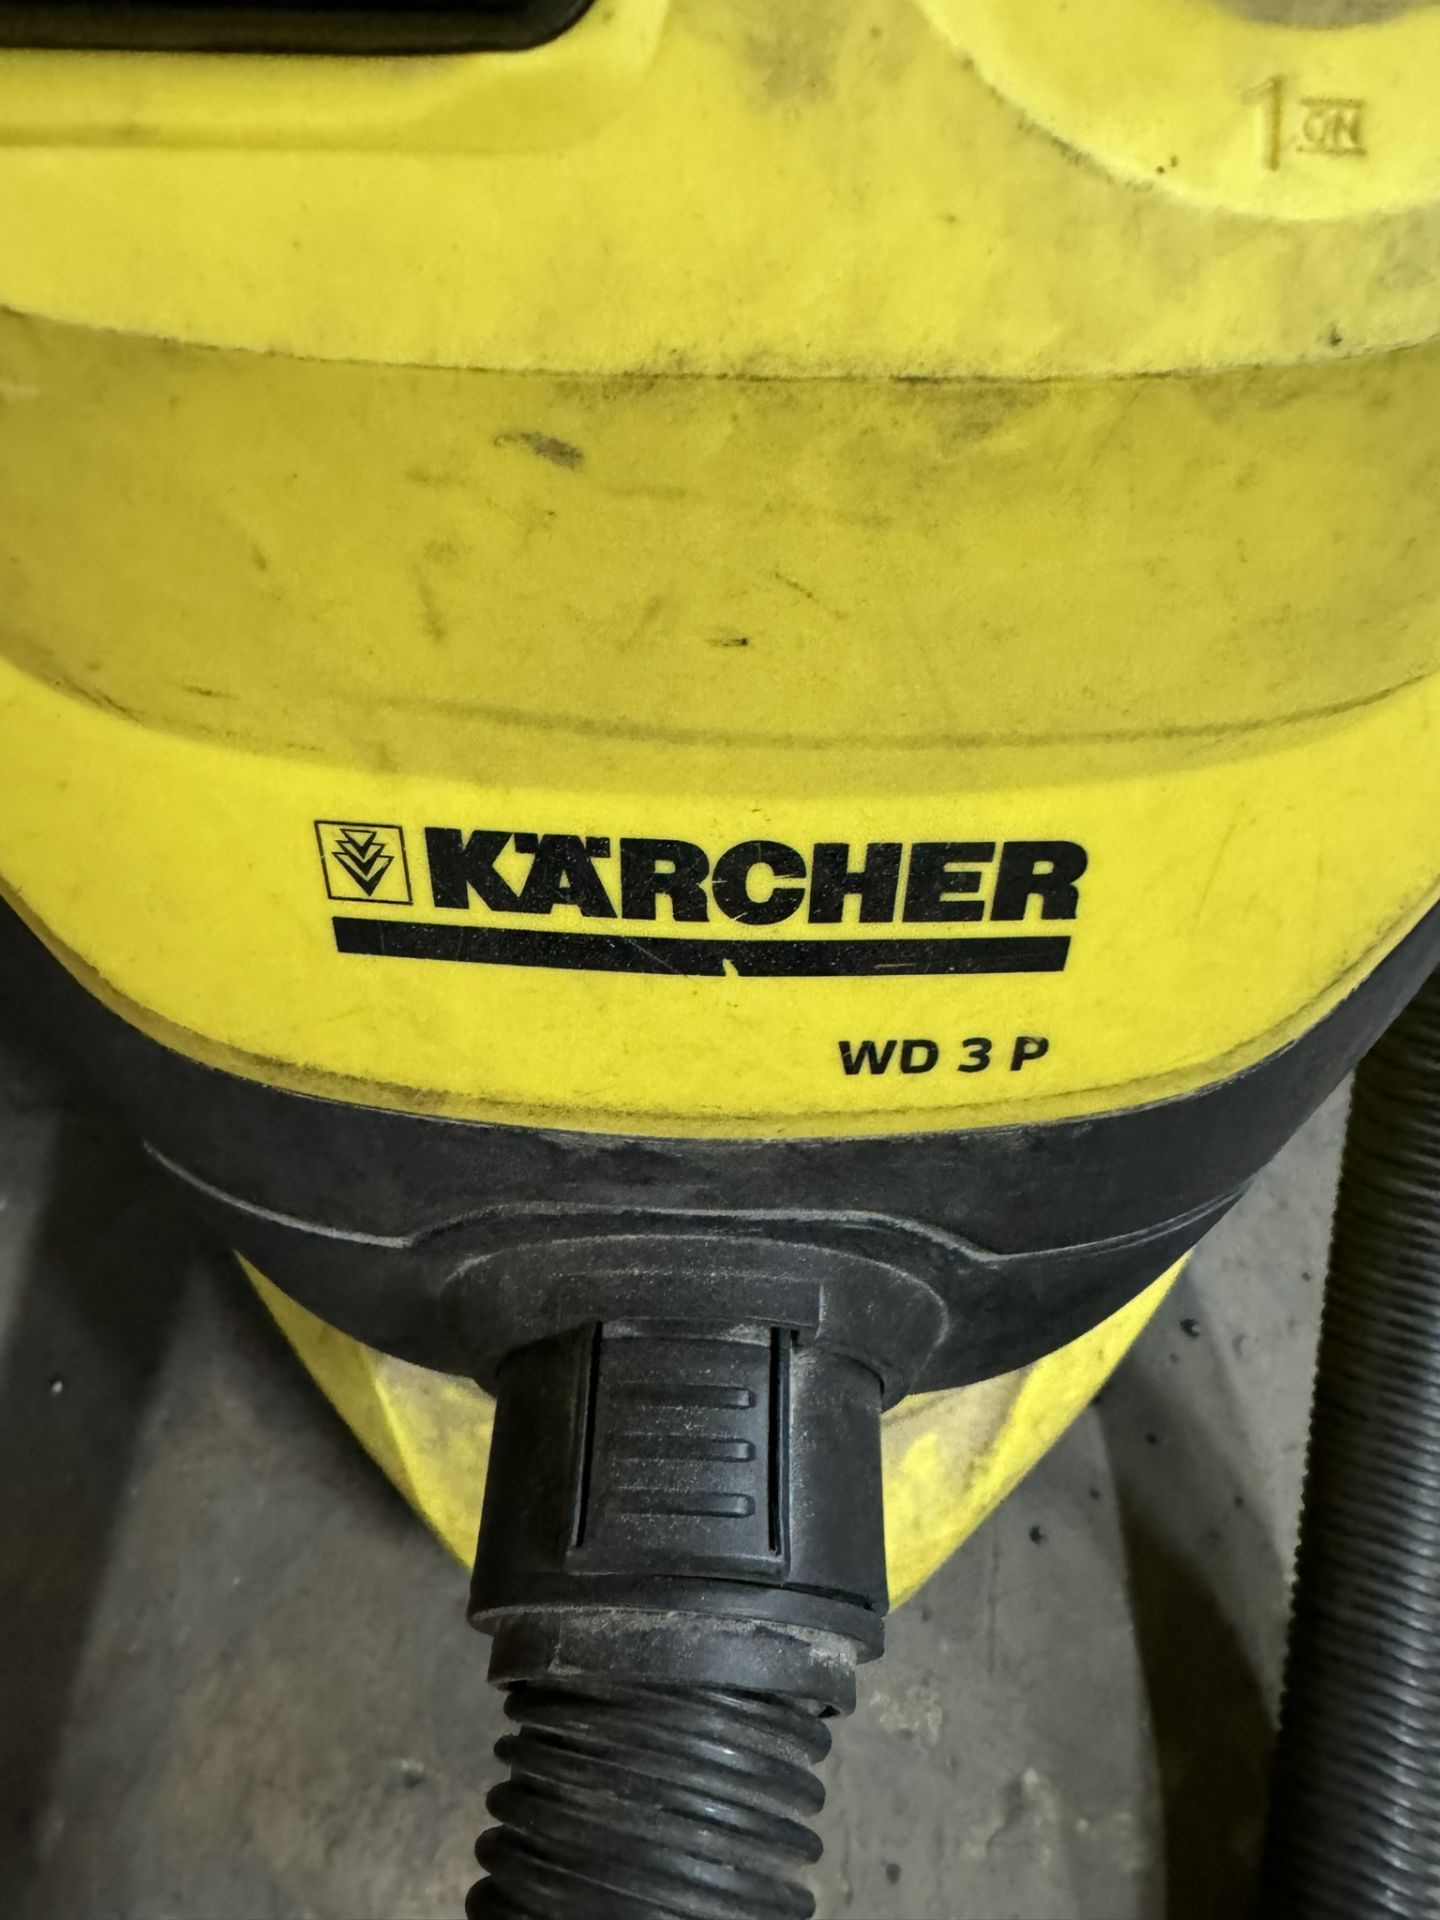 Karcher WD3P Cylinder Wet and Dry Vacuum Cleaner - Image 4 of 5